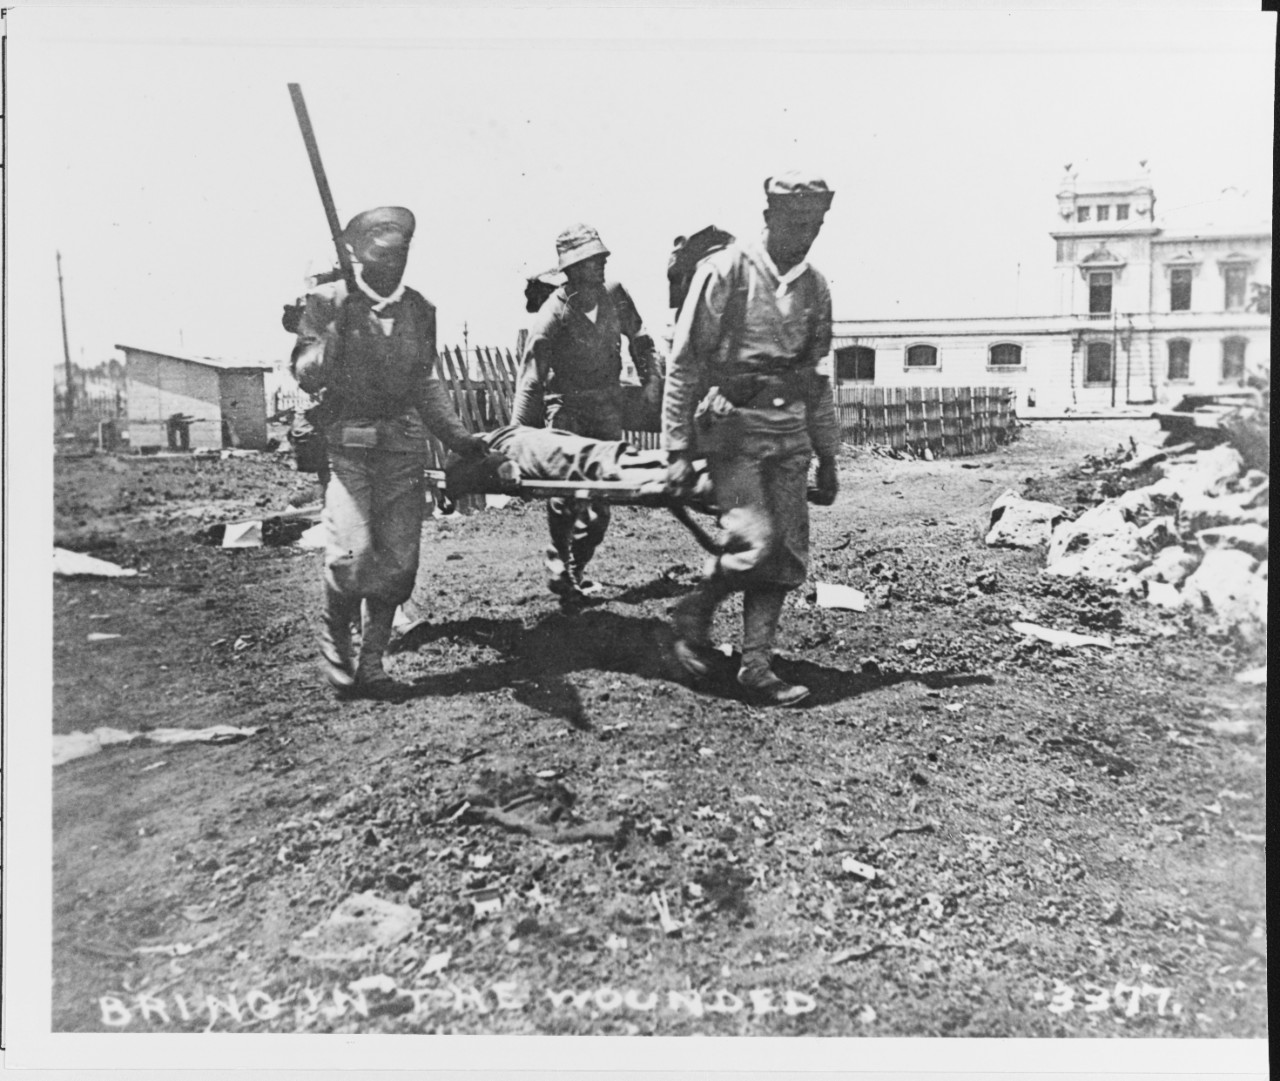 Sailors from USS FLORIDA serve as stretcher bearers in Veracruz, Mexico, in April 1914